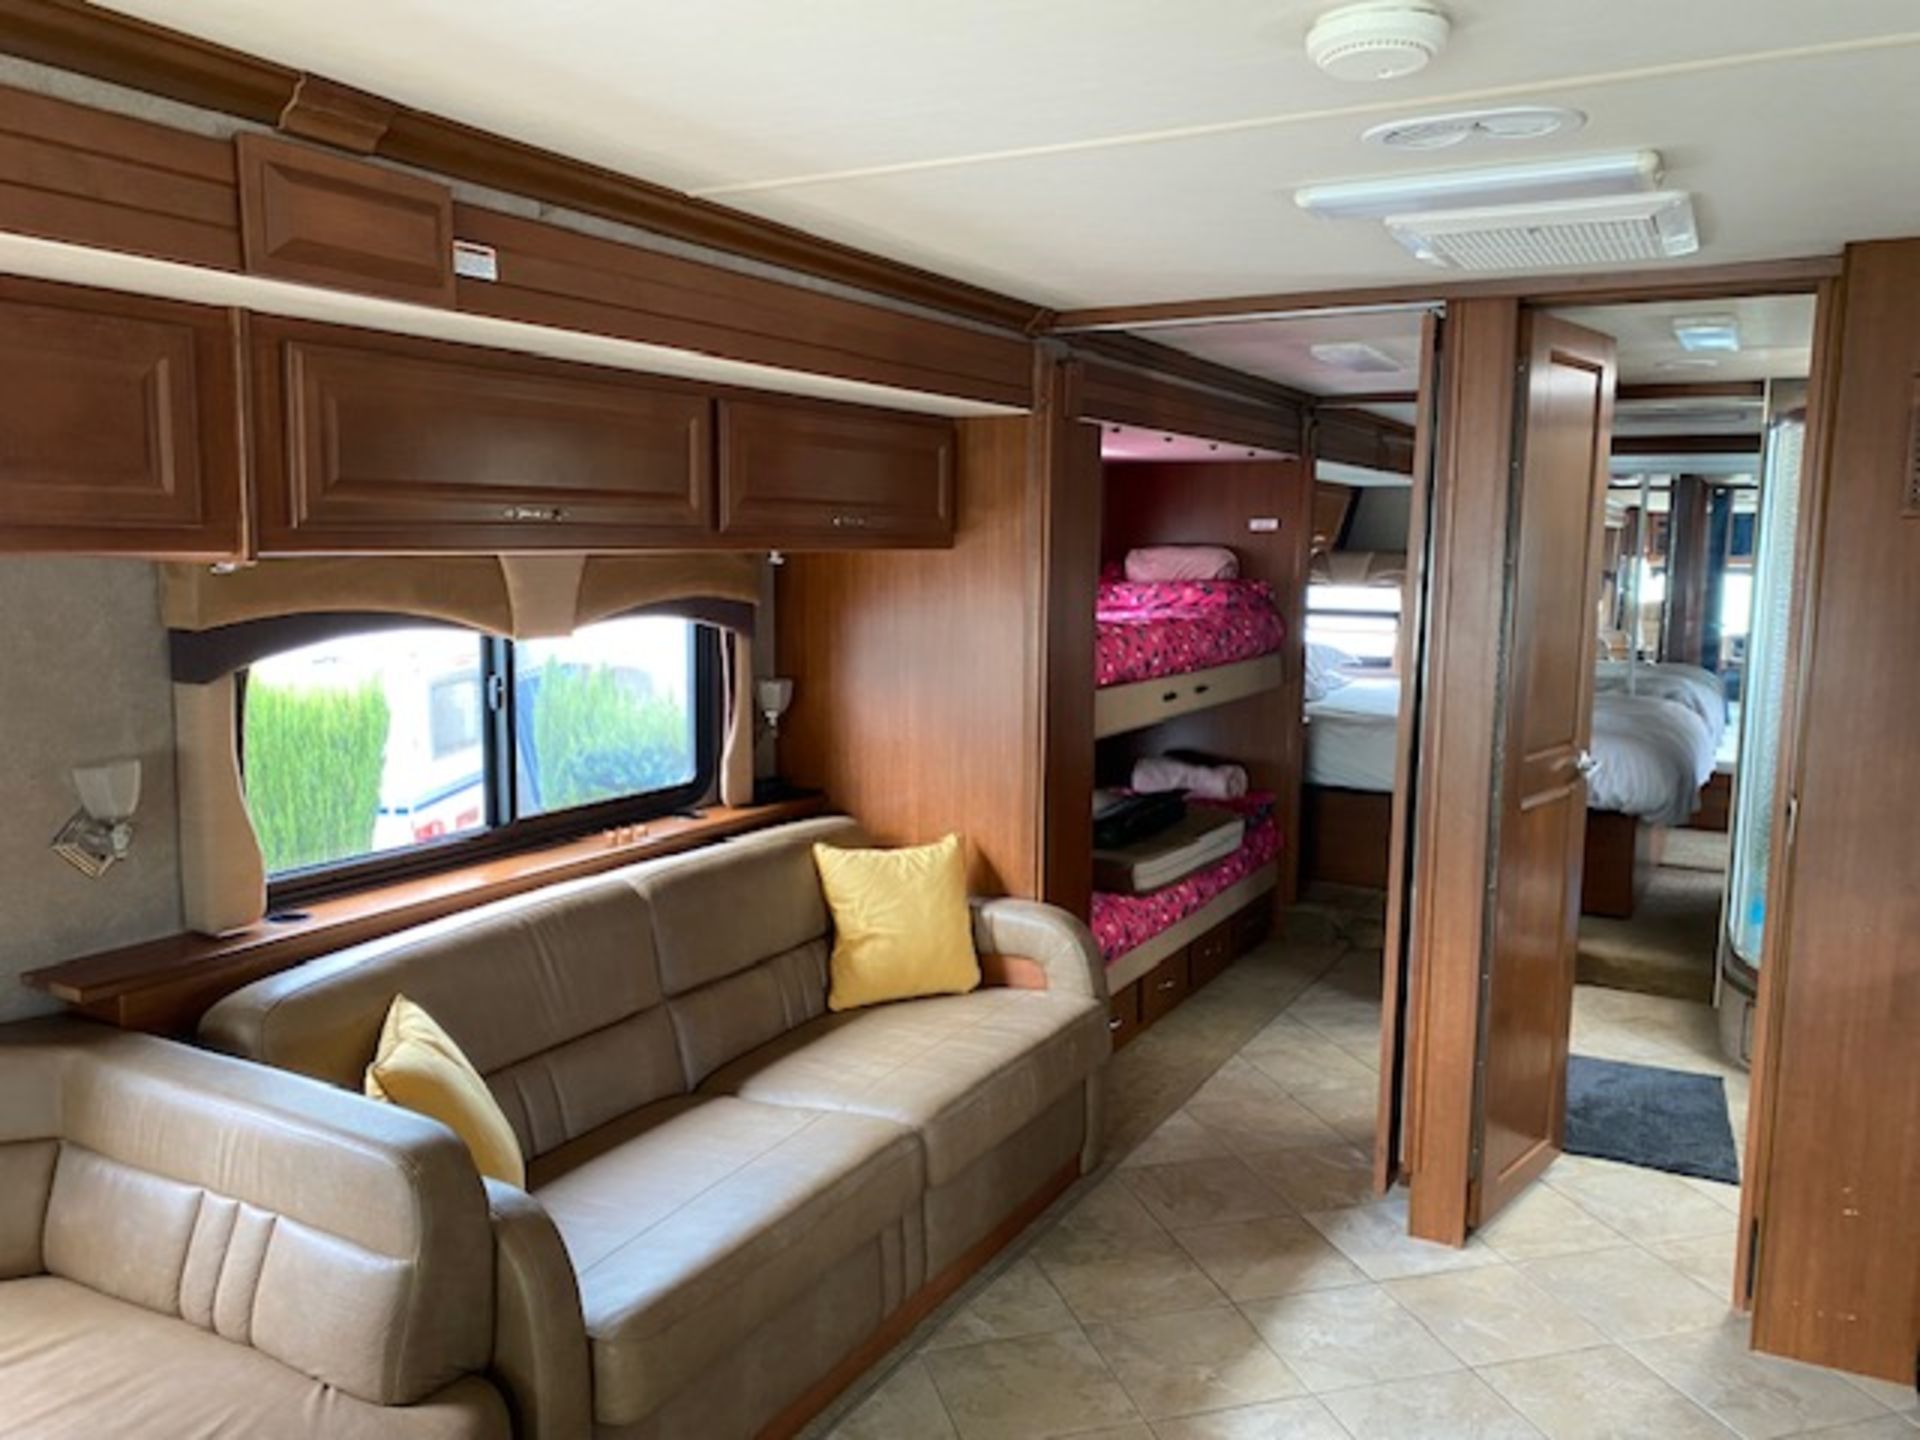 2010 FLEETWOOD DISCOVERY 40G AMERICAN MOTORHOME RV *NO VAT* - Image 35 of 39